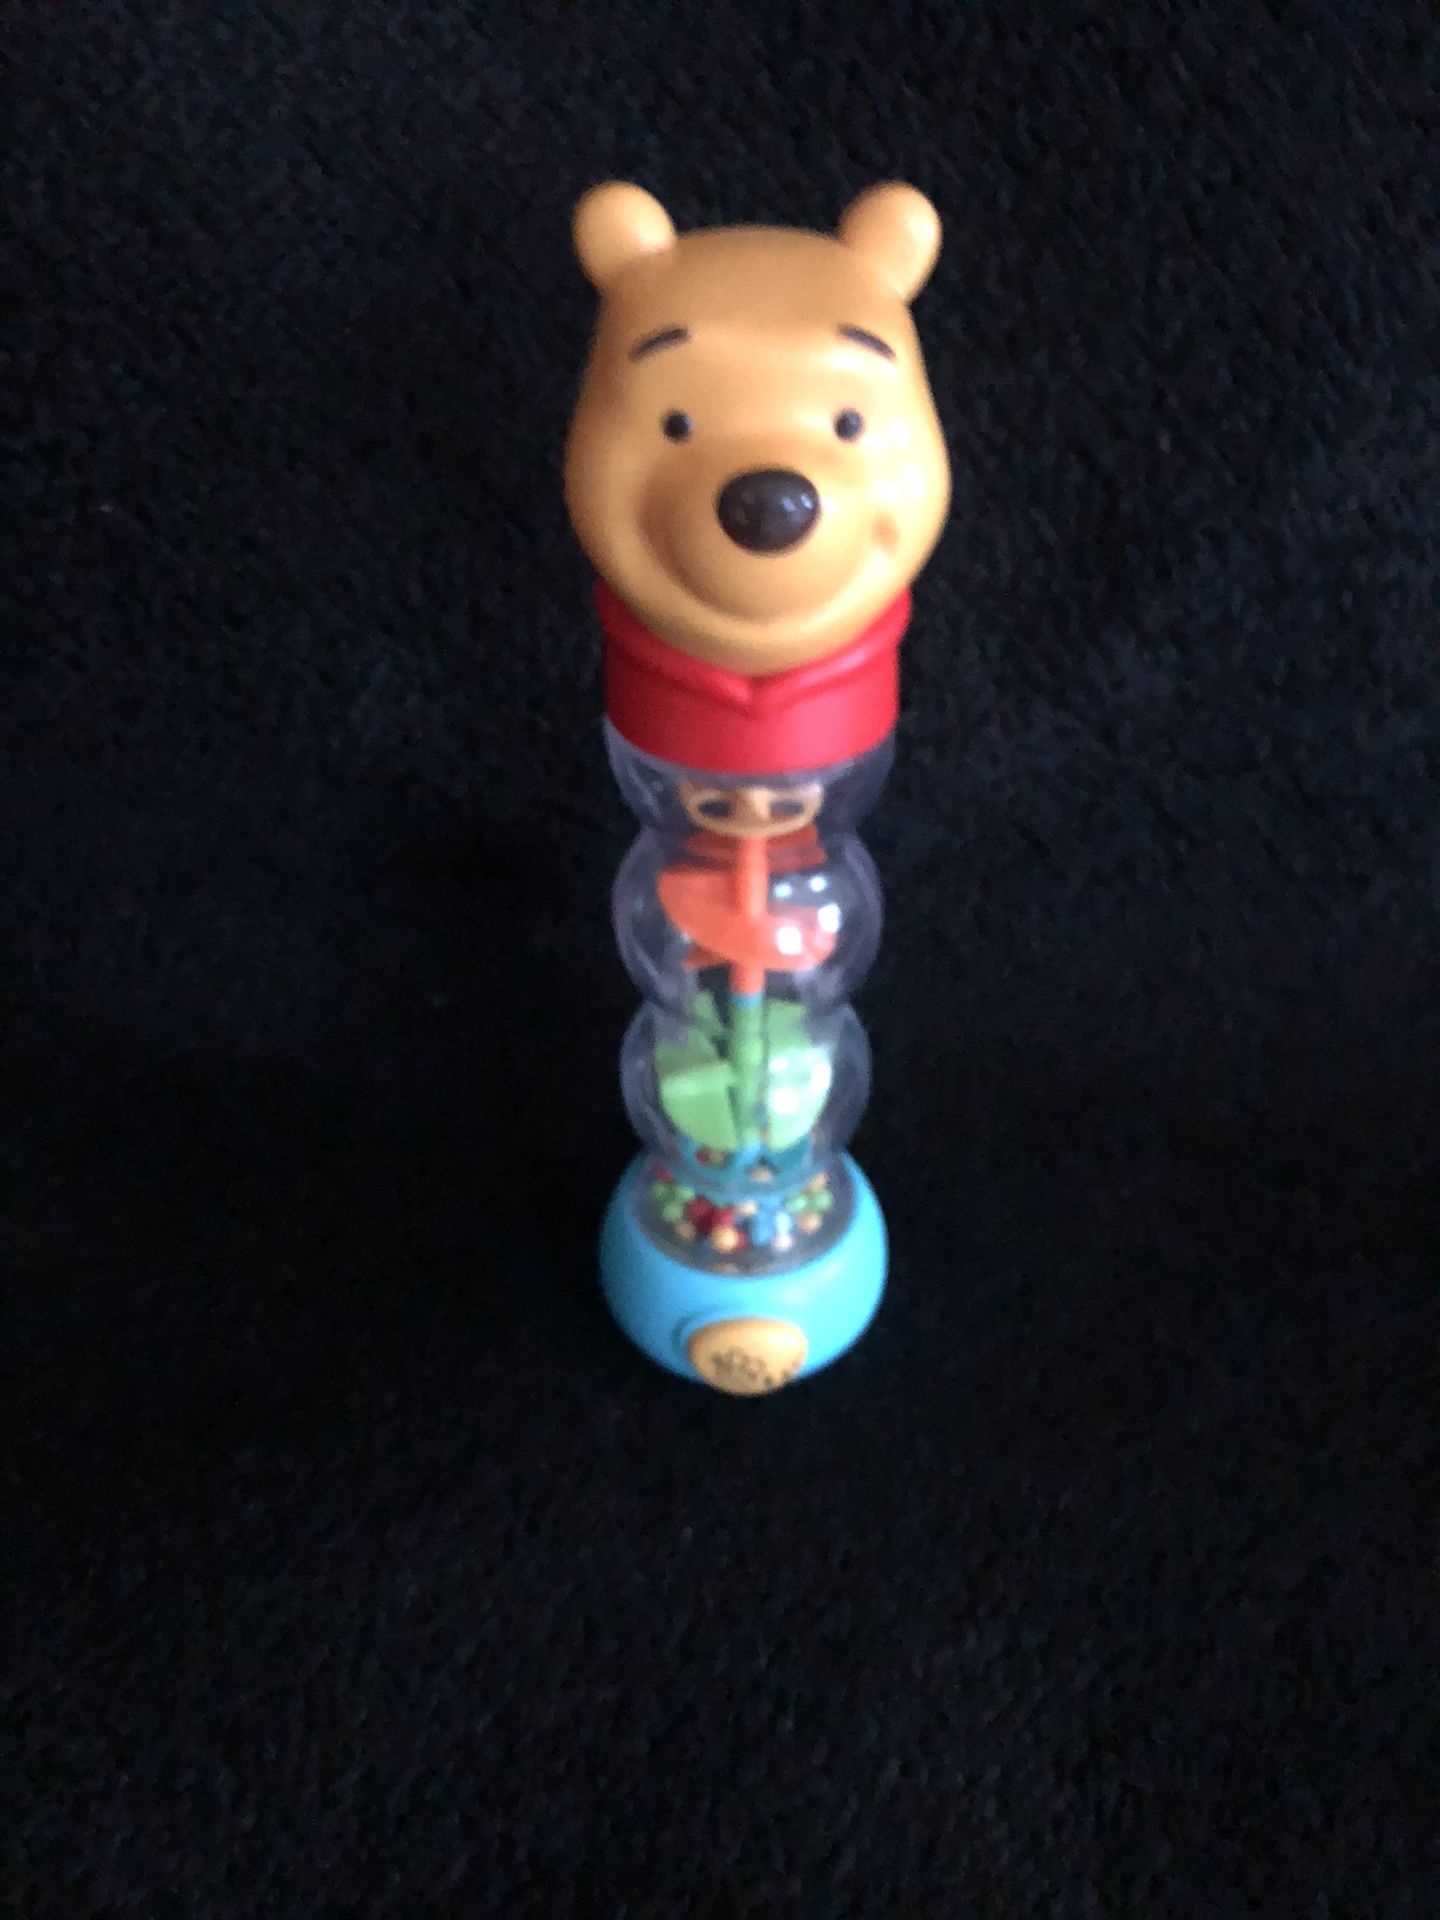 Disney baby, Winnie the Pooh, rainmaker sounds, light, rattle toy